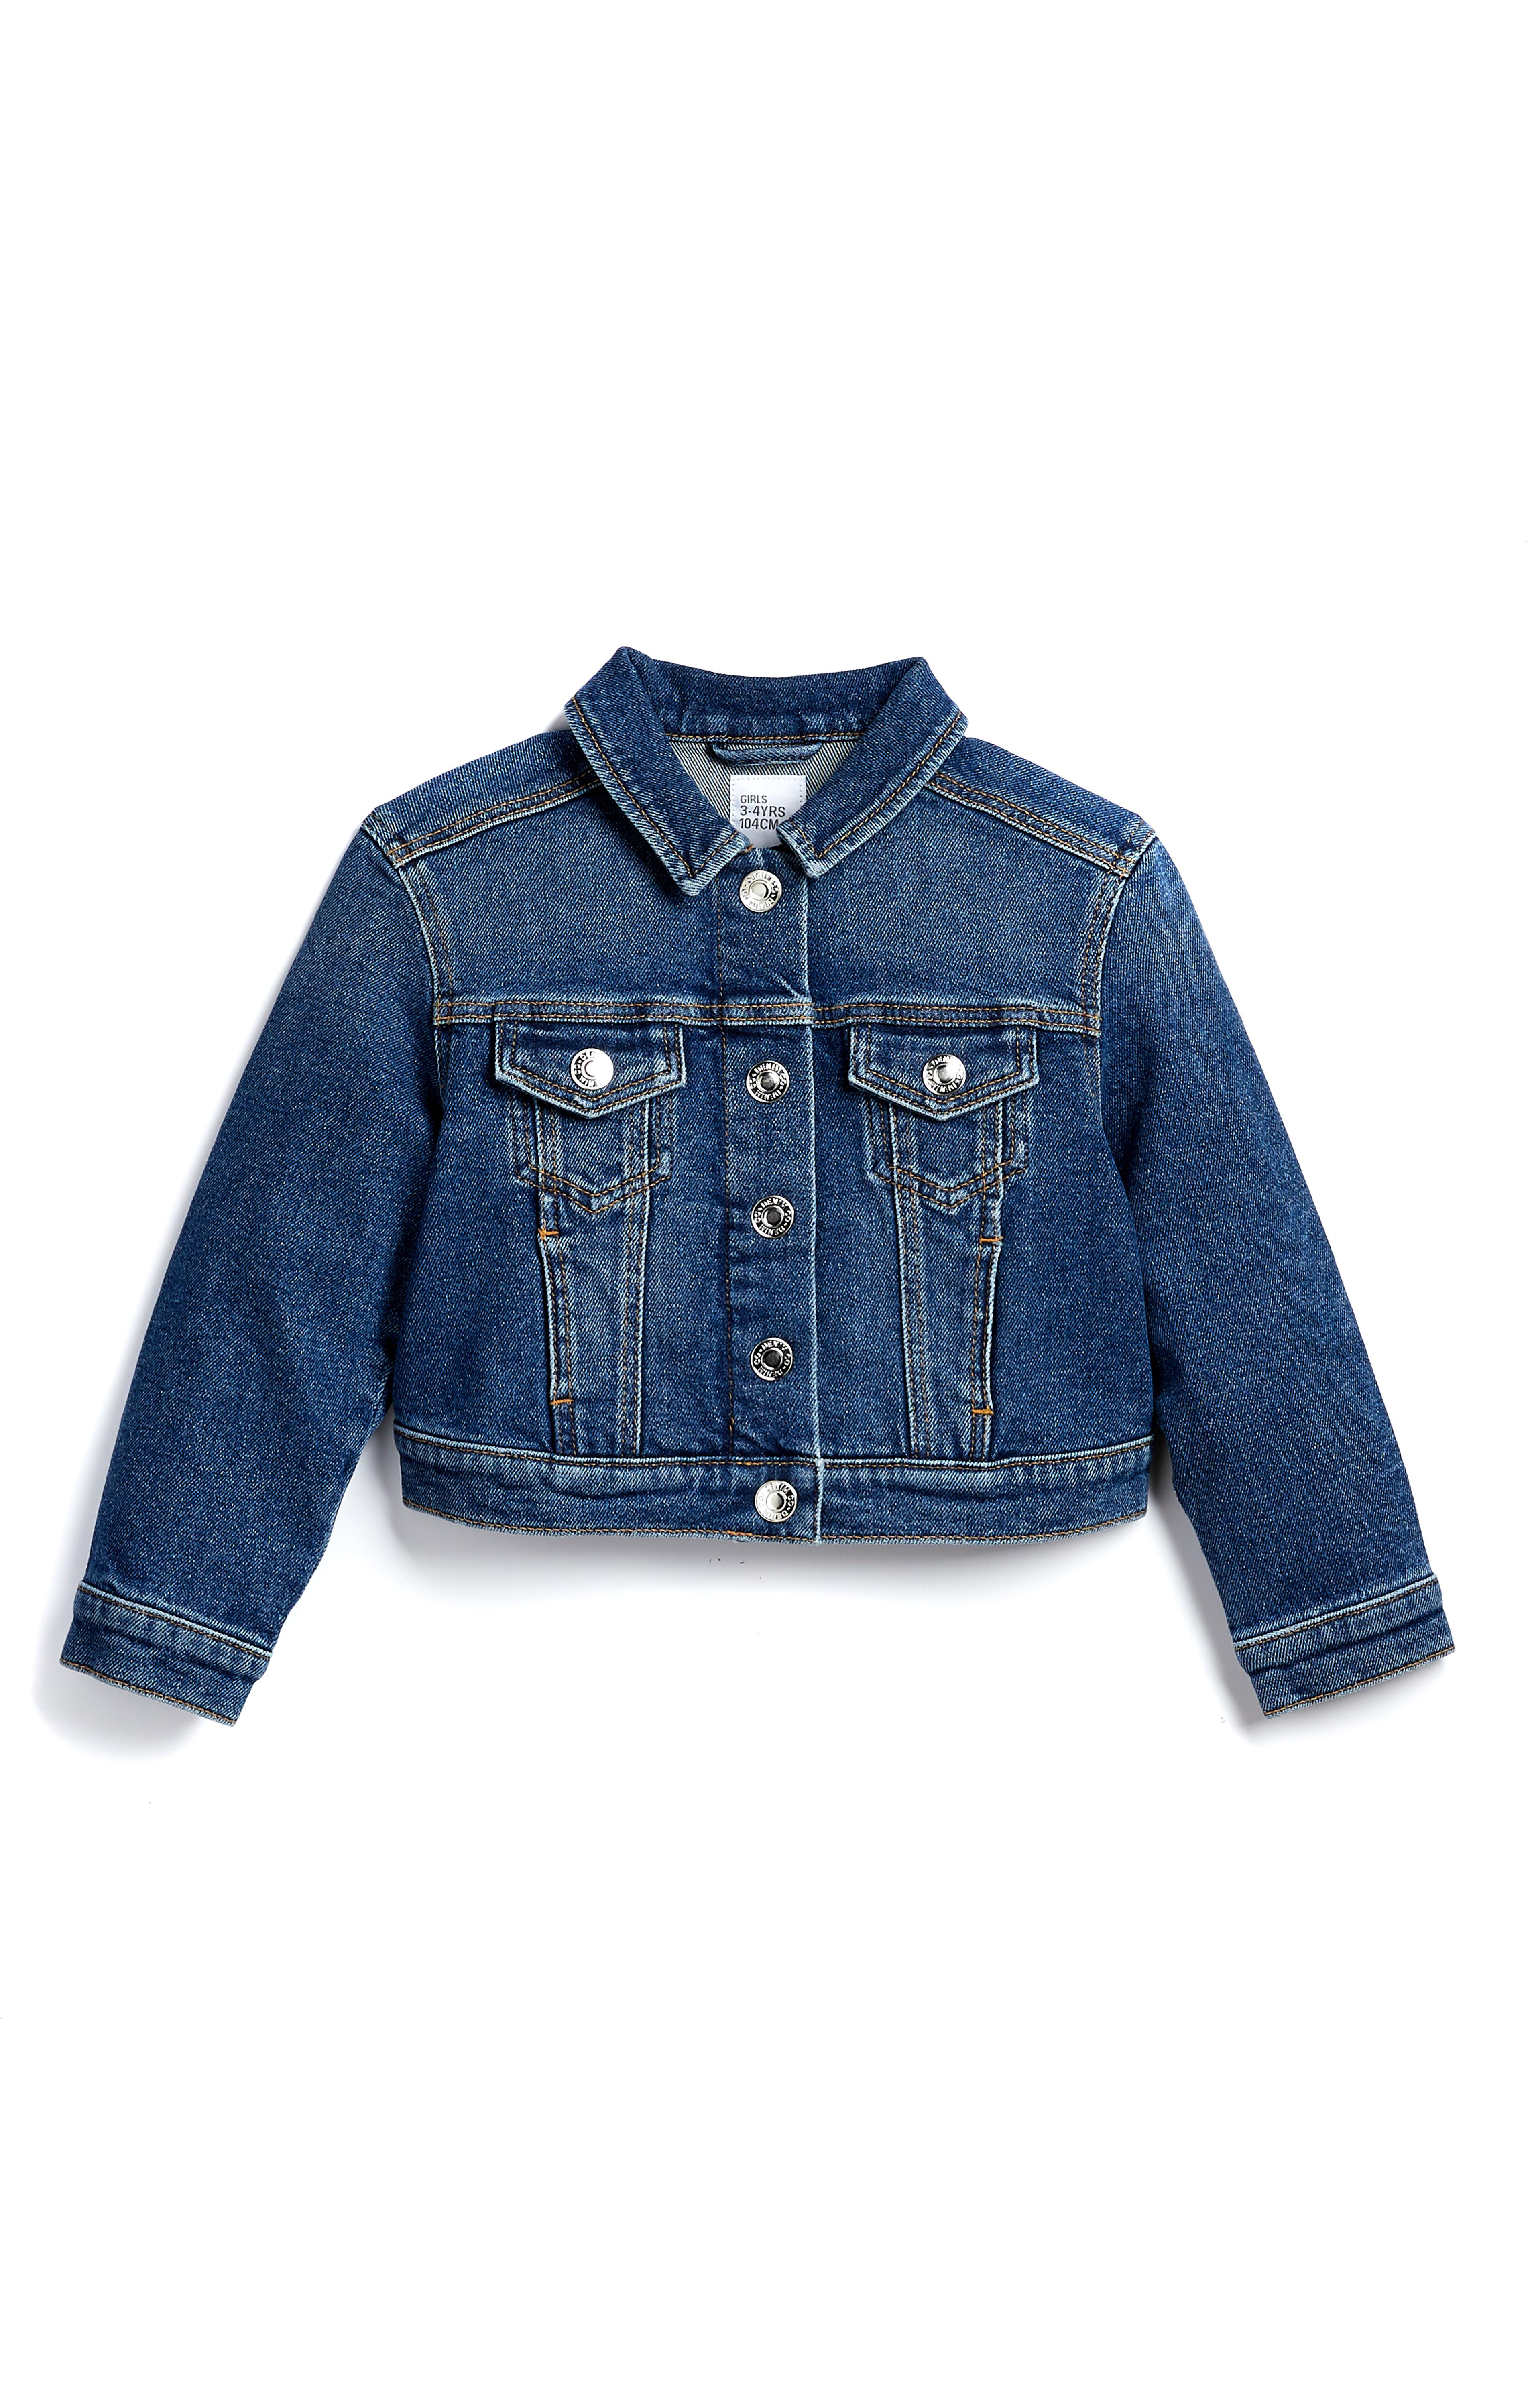 Younger Girl Denim Jacket | Girls Clothes Age 2-7 | Girls Clothes ...